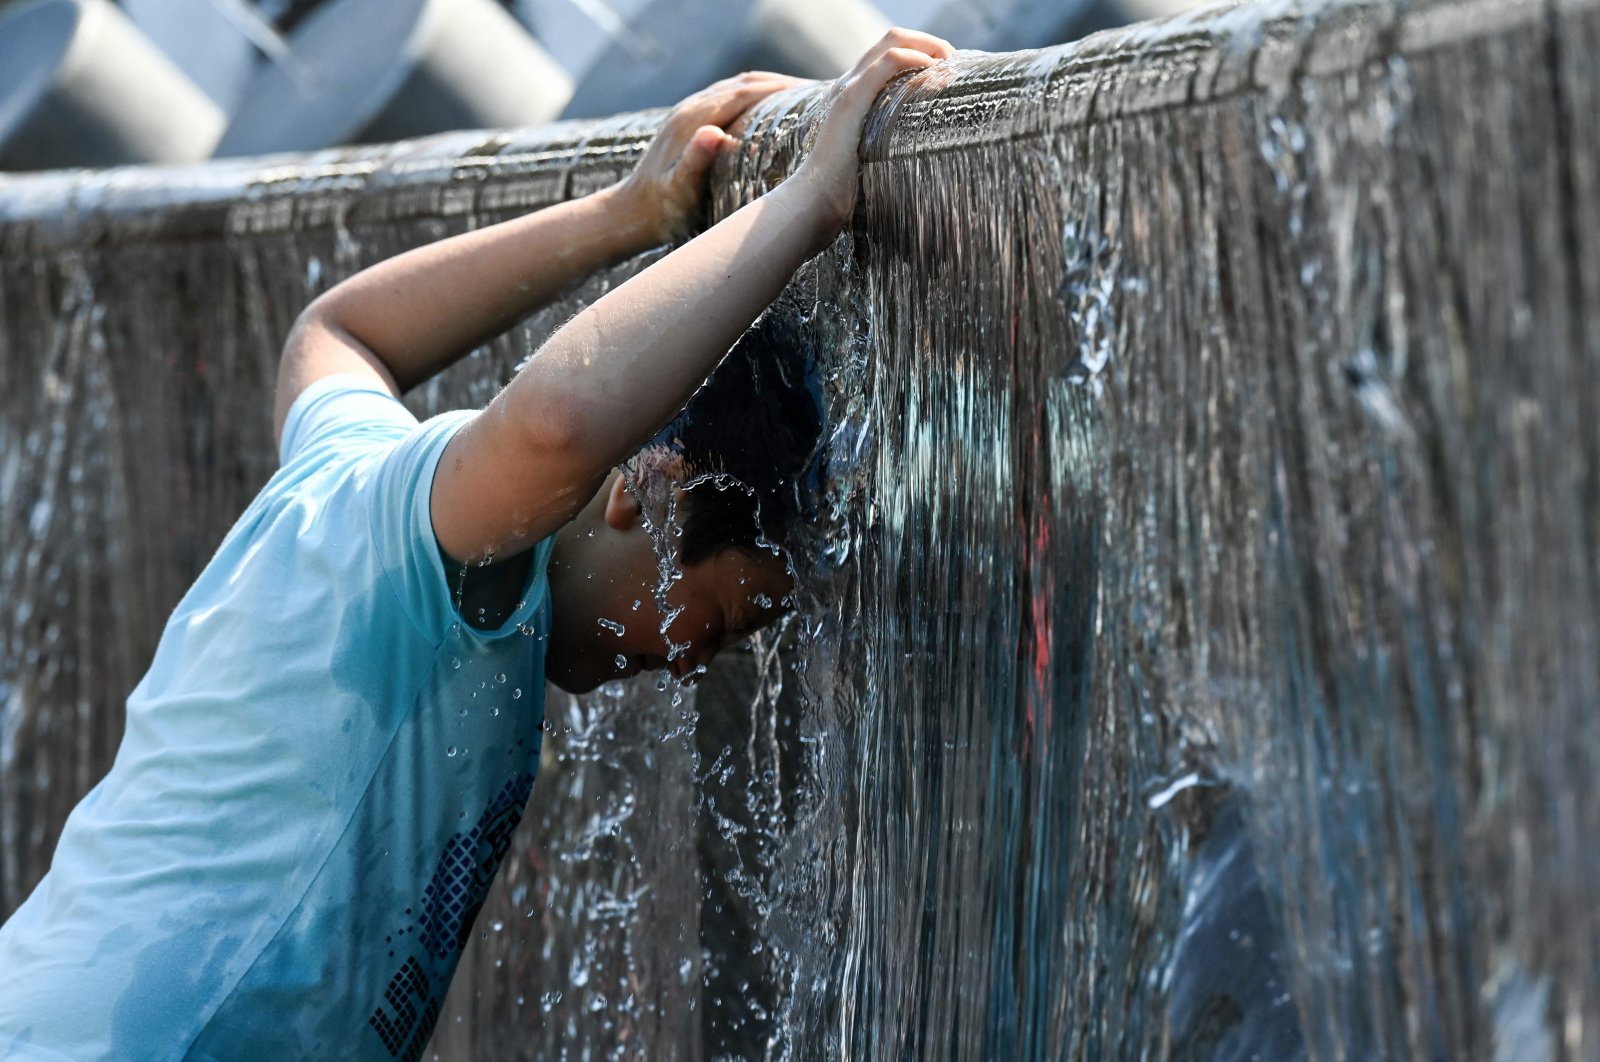 A boy cools off in a fountain during a hot summer day in downtown Moscow, Russia, July 13, 2021. (AFP Photo)